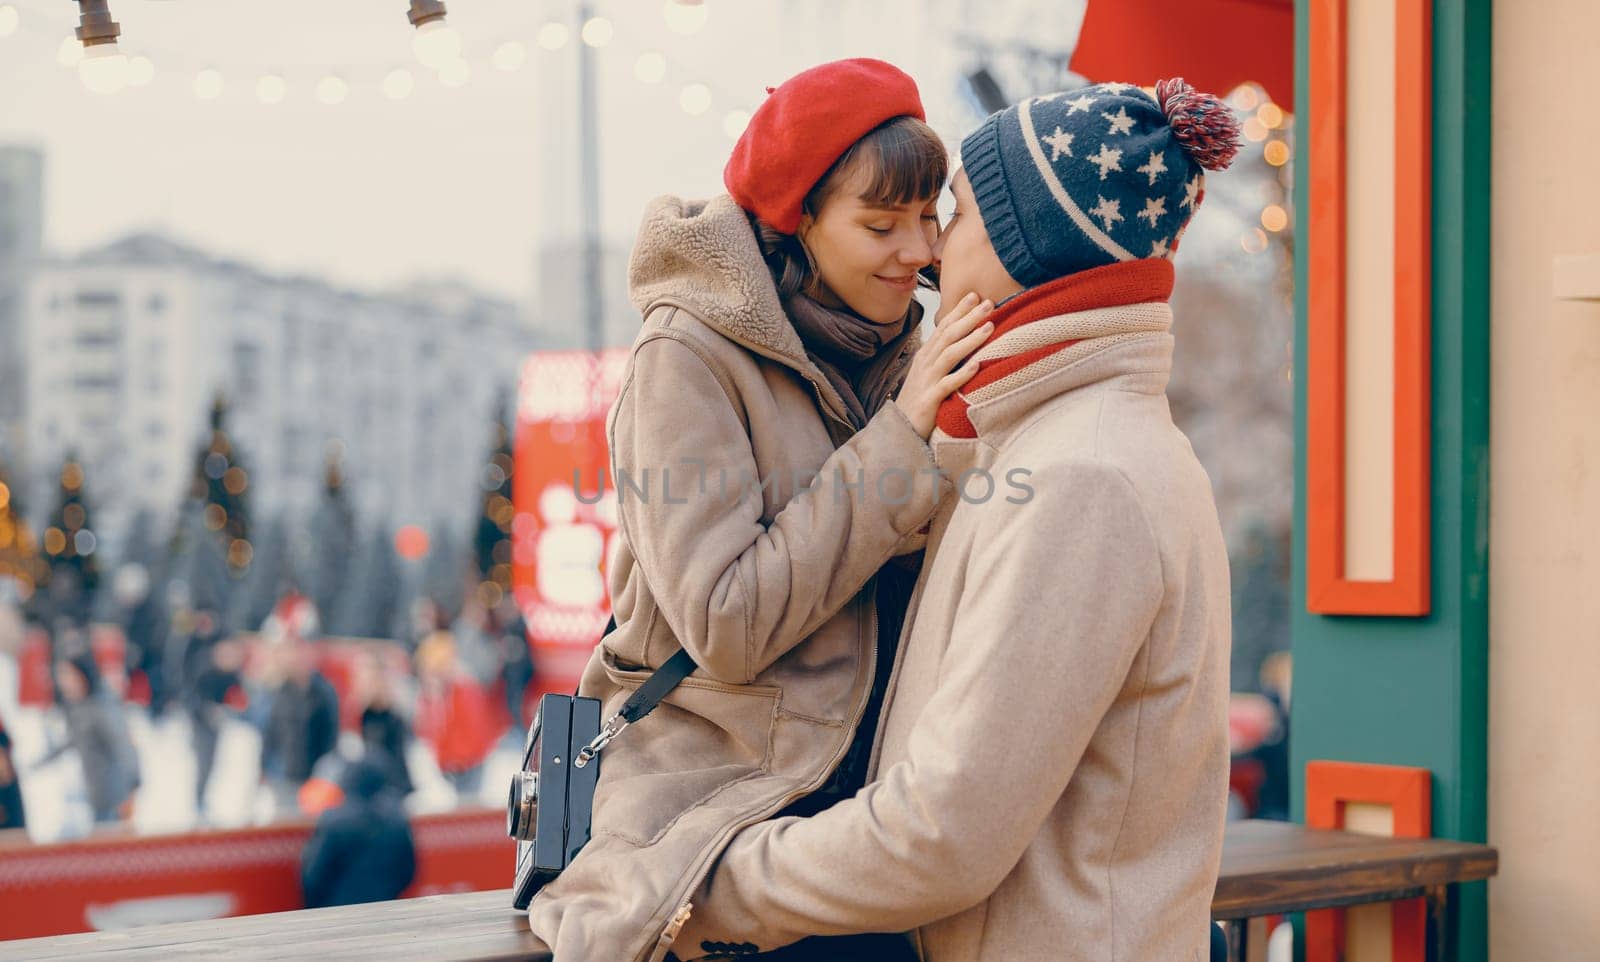 A woman tenderly touches her partner's face, sharing a close moment at a Christmas market with festive lights twinkling in the background.